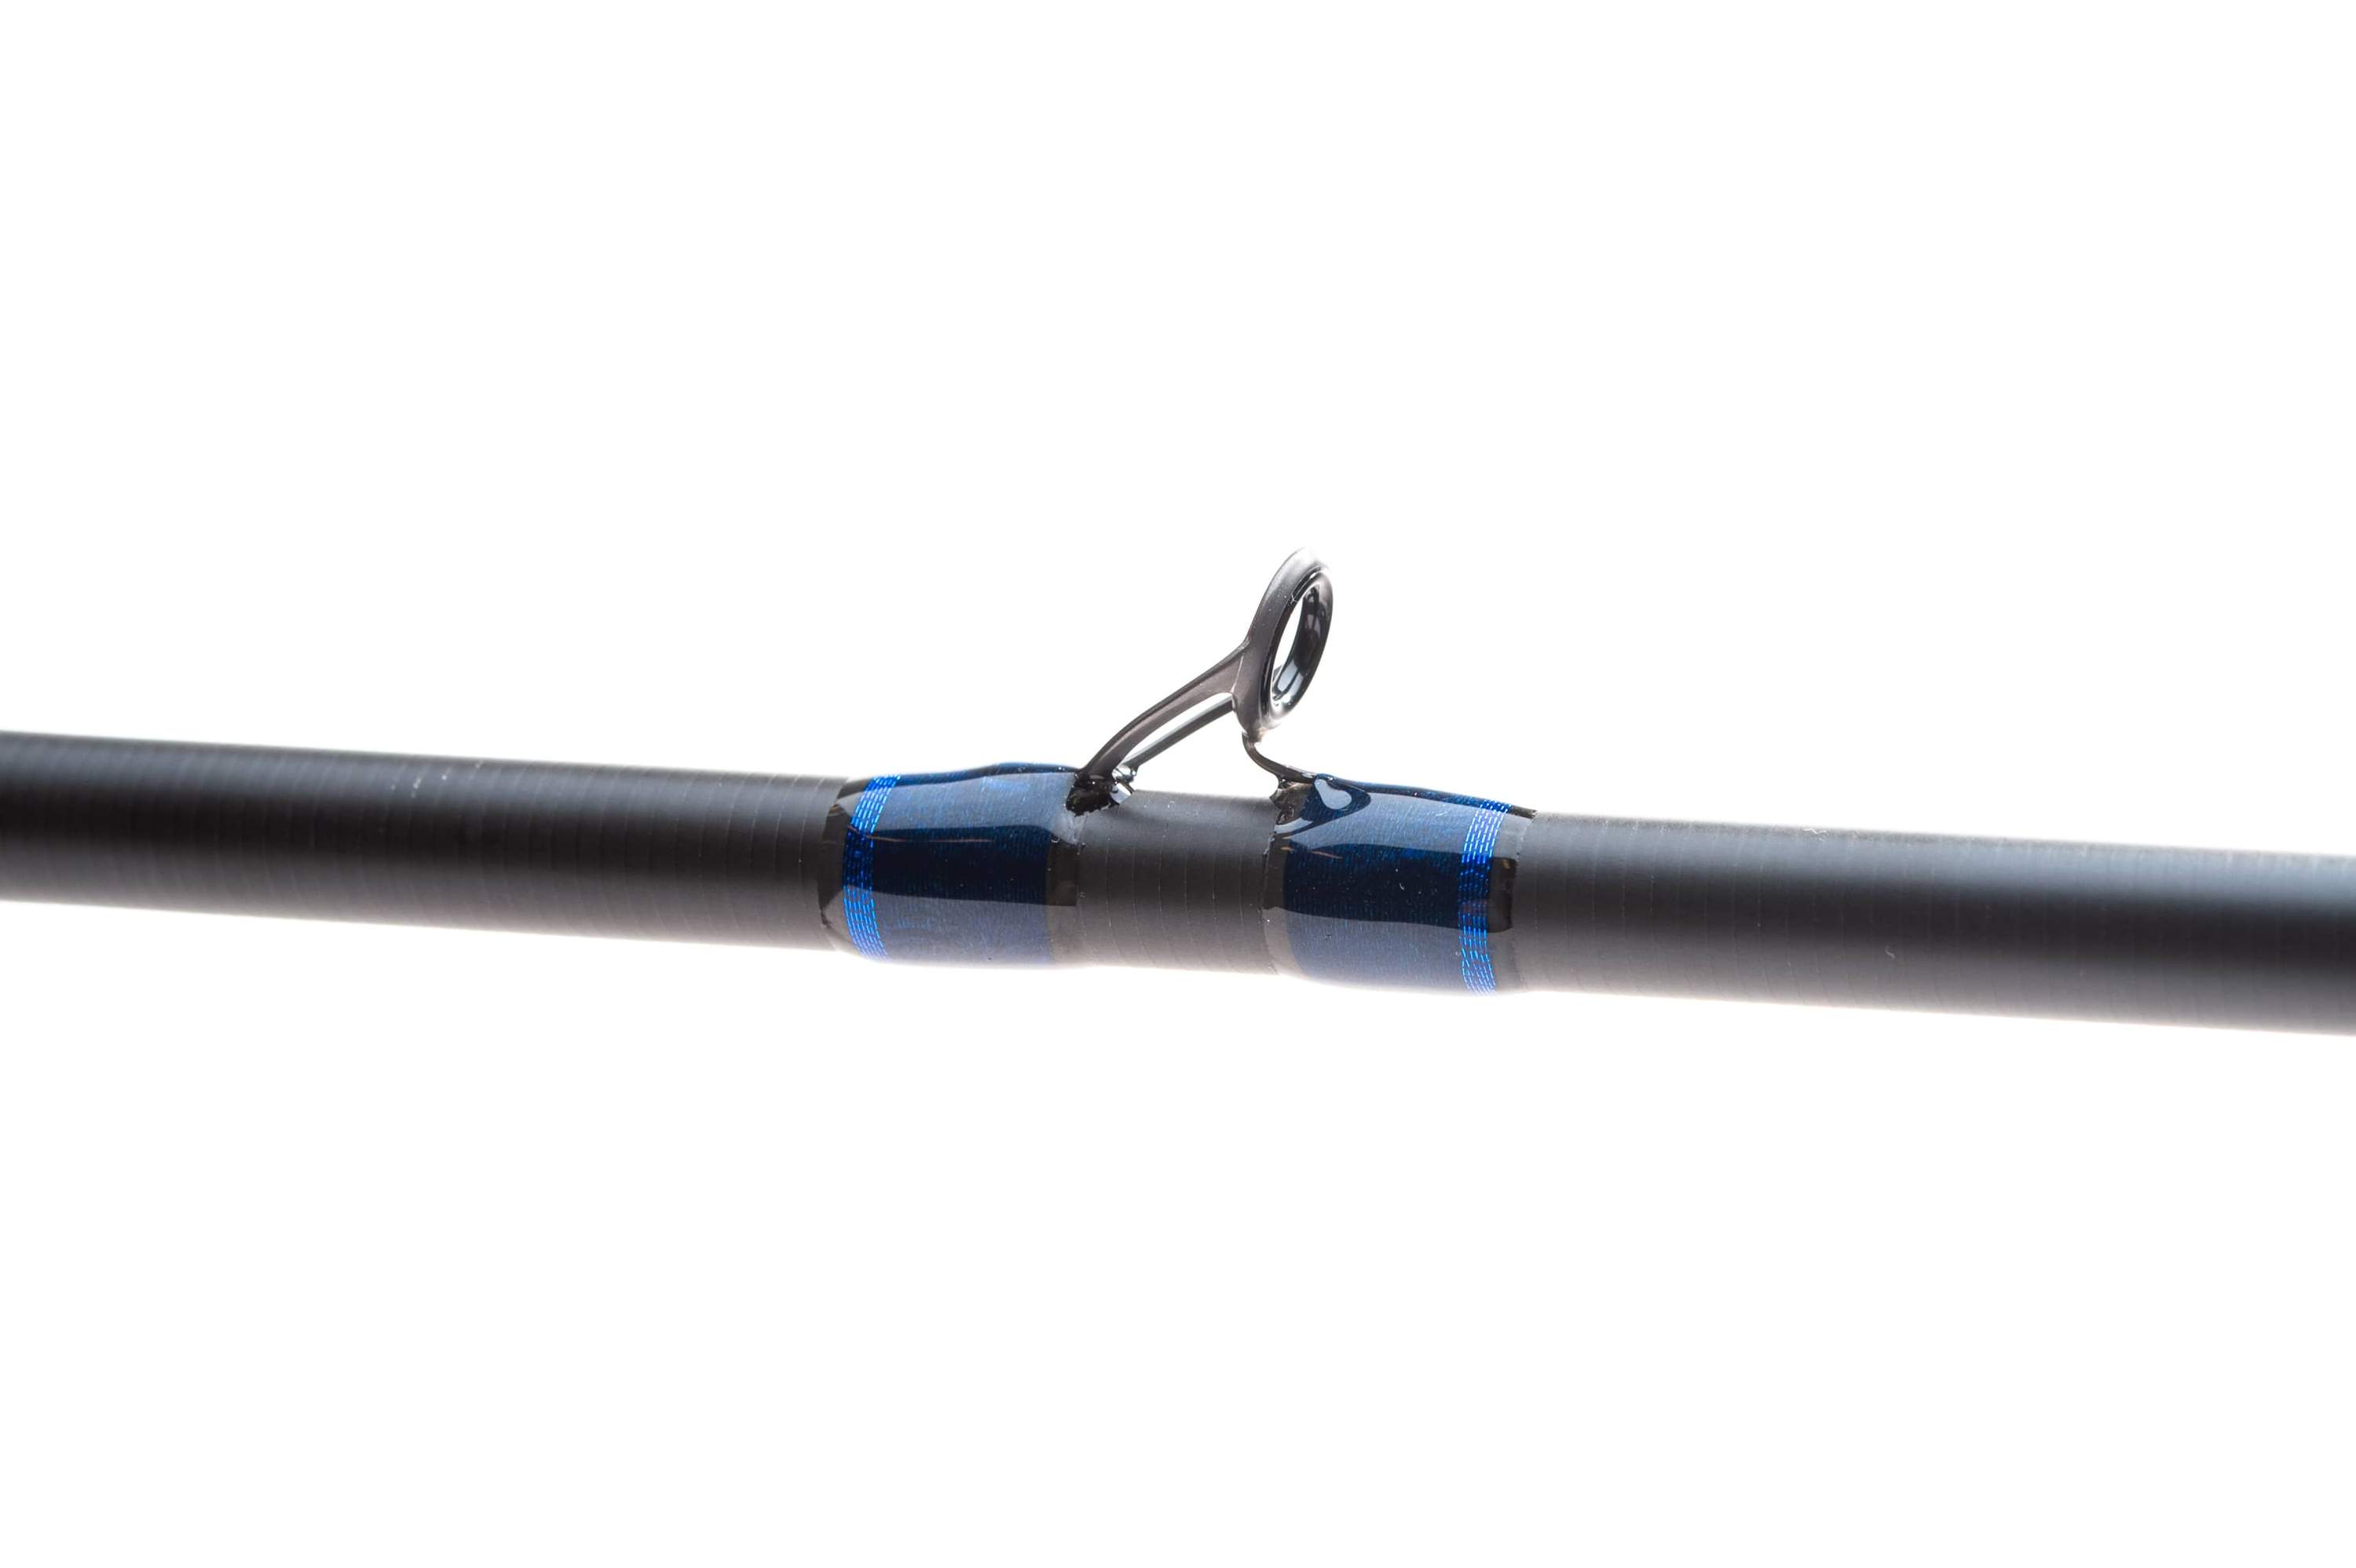 Helium Hollow Body Frog, Toads Casting Rods